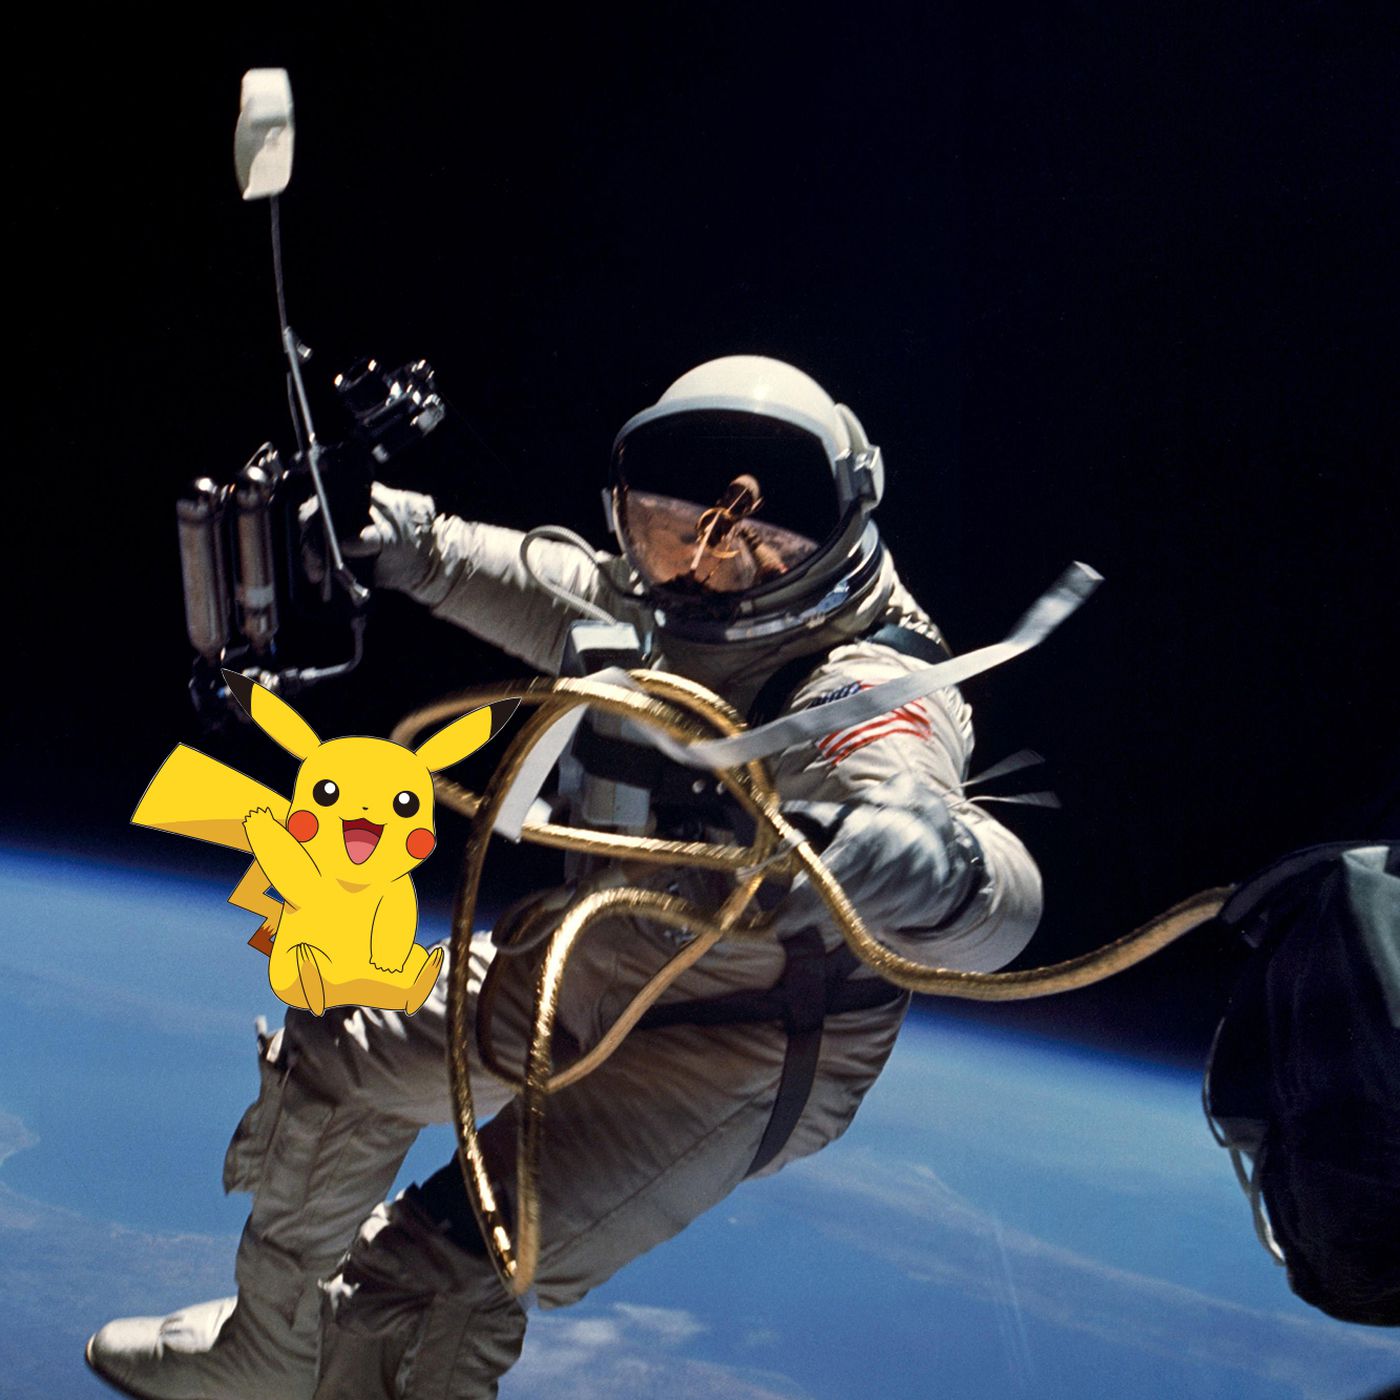 Can you play Pokémon Go in space? NASA says no, you cannot - The Verge